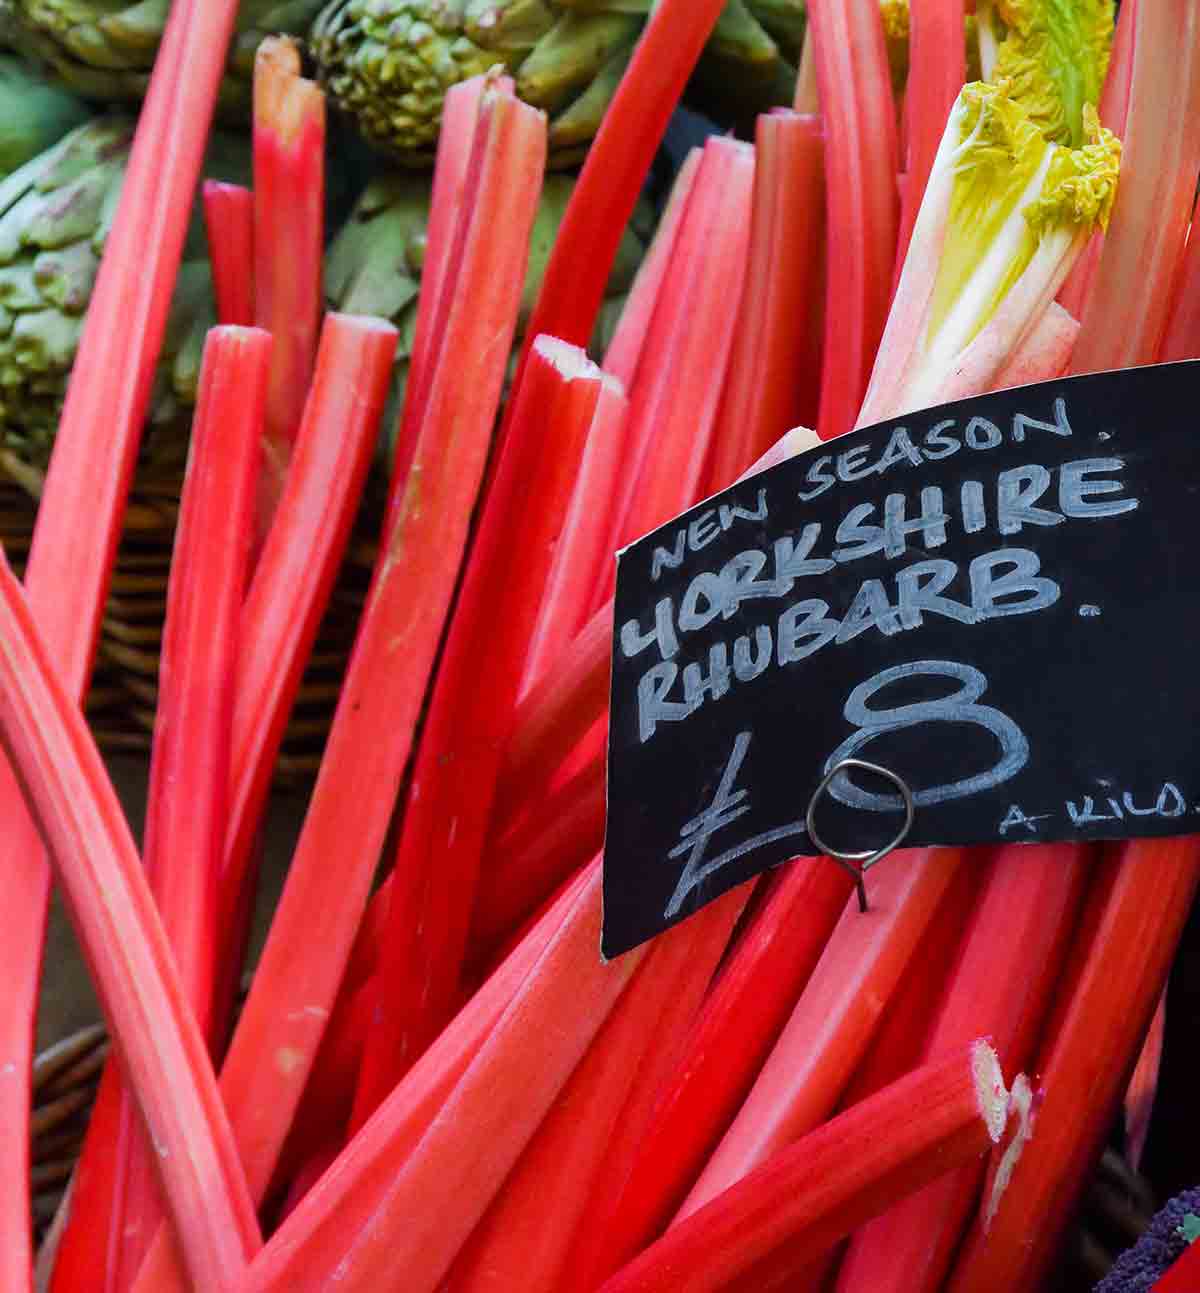 Stalks of rhubarb with a black price sign.